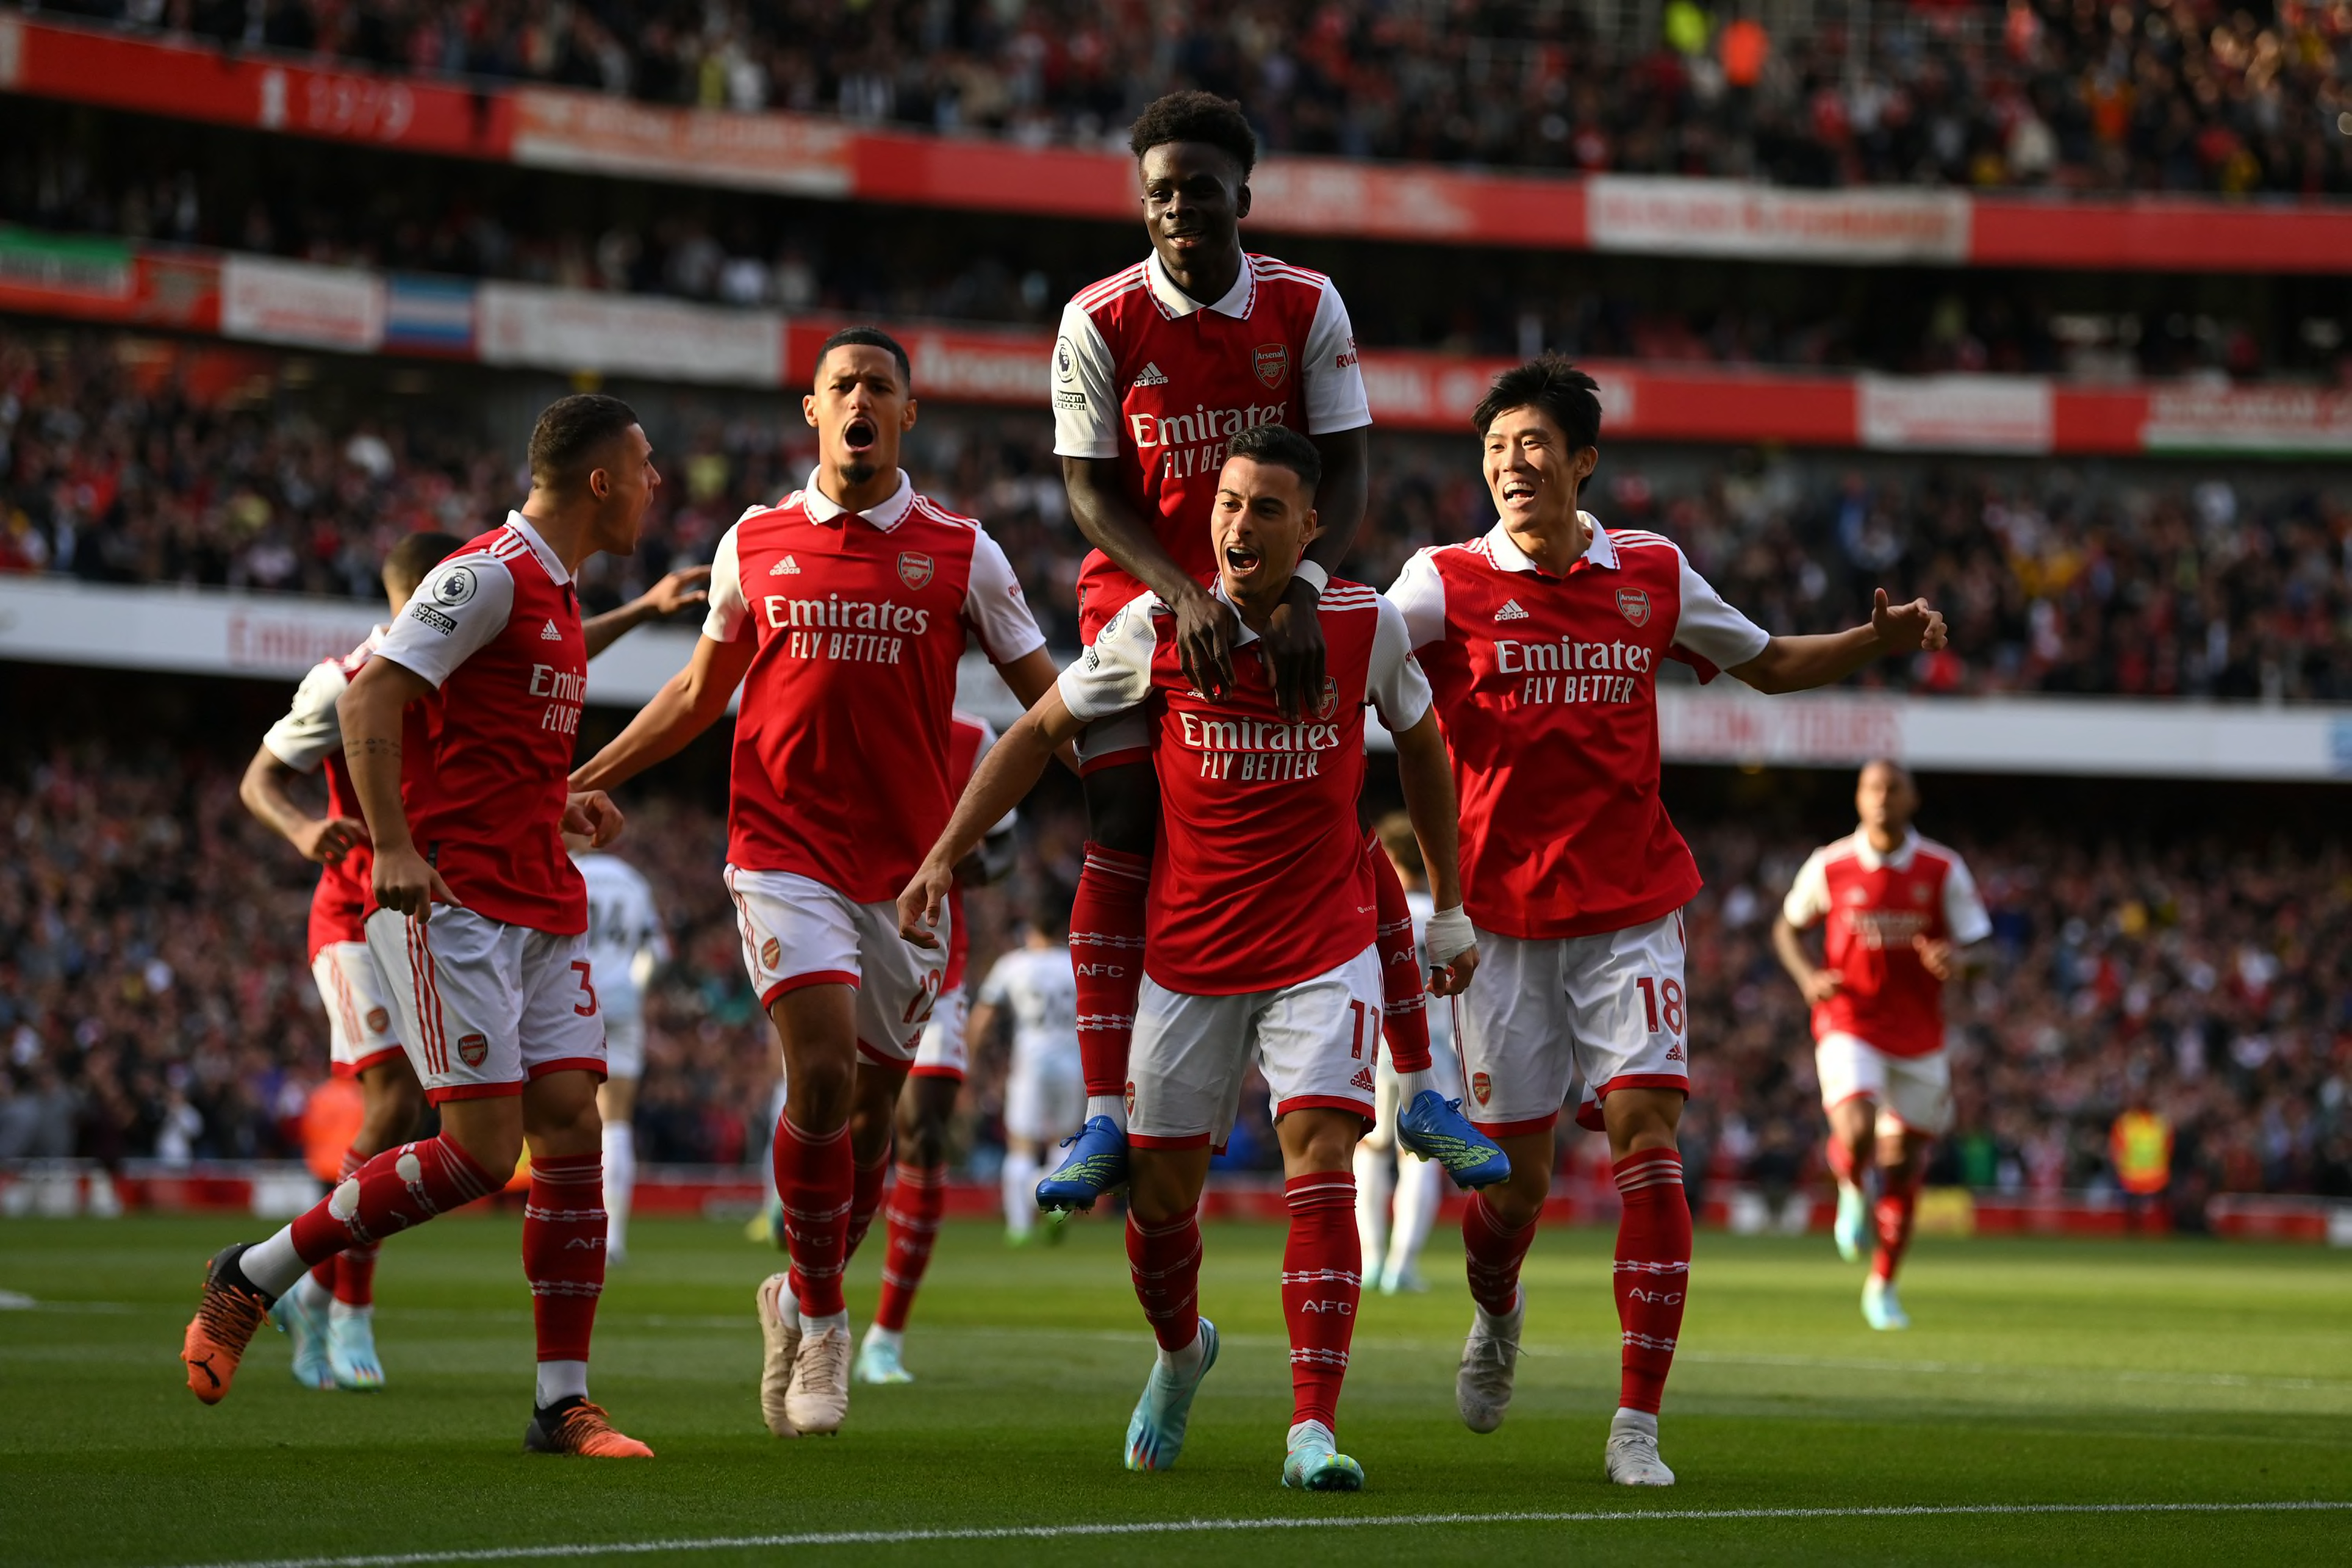 Leeds United vs Arsenal Preview How to Watch, Team News and Prediction